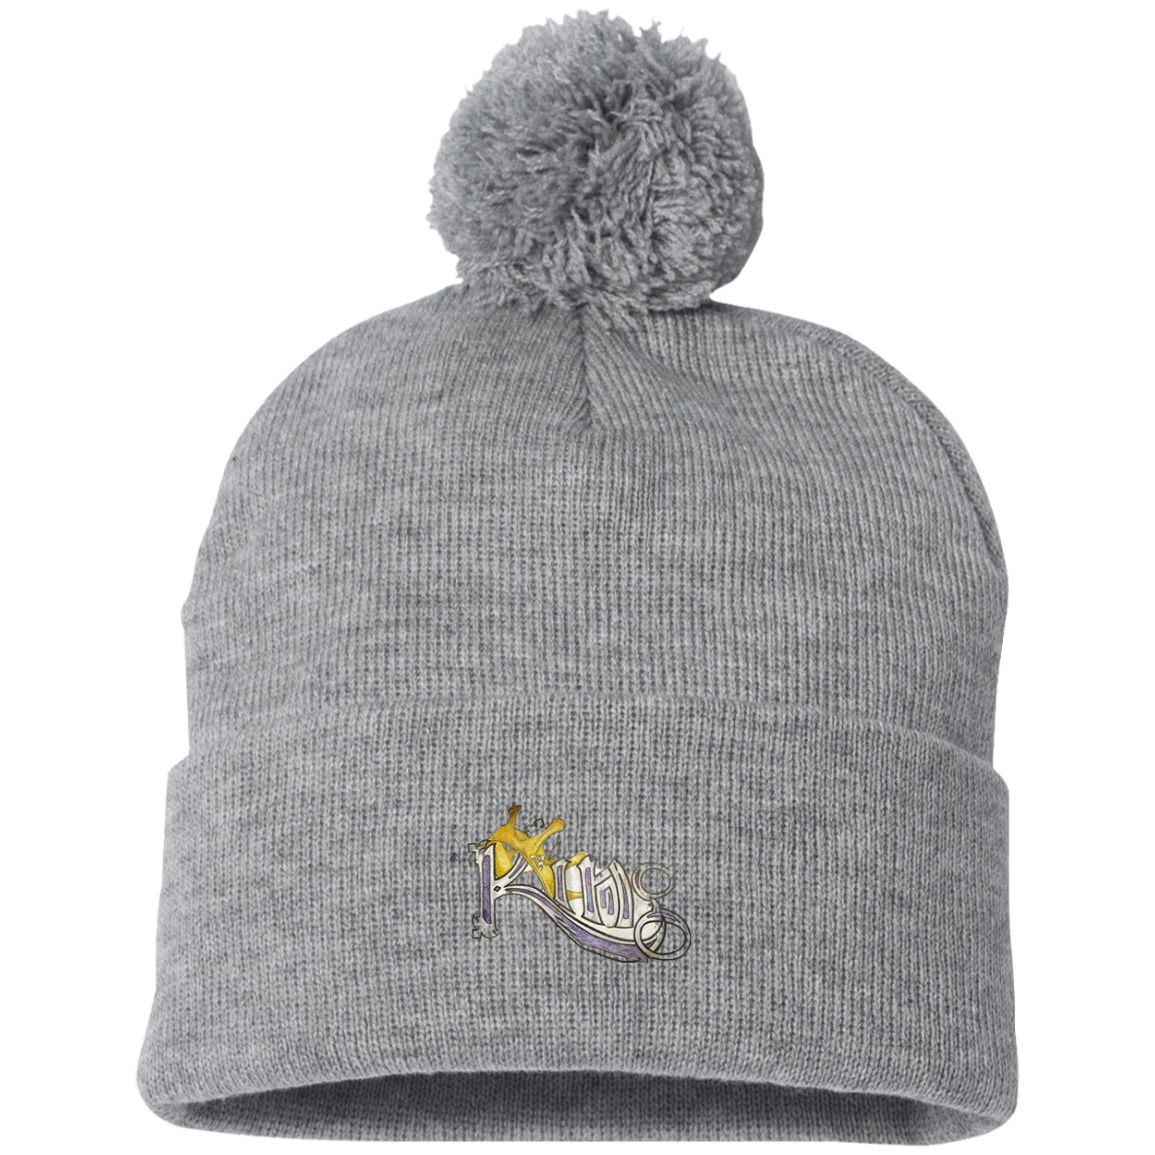 King Pom Knit Cap by Amagiri Young